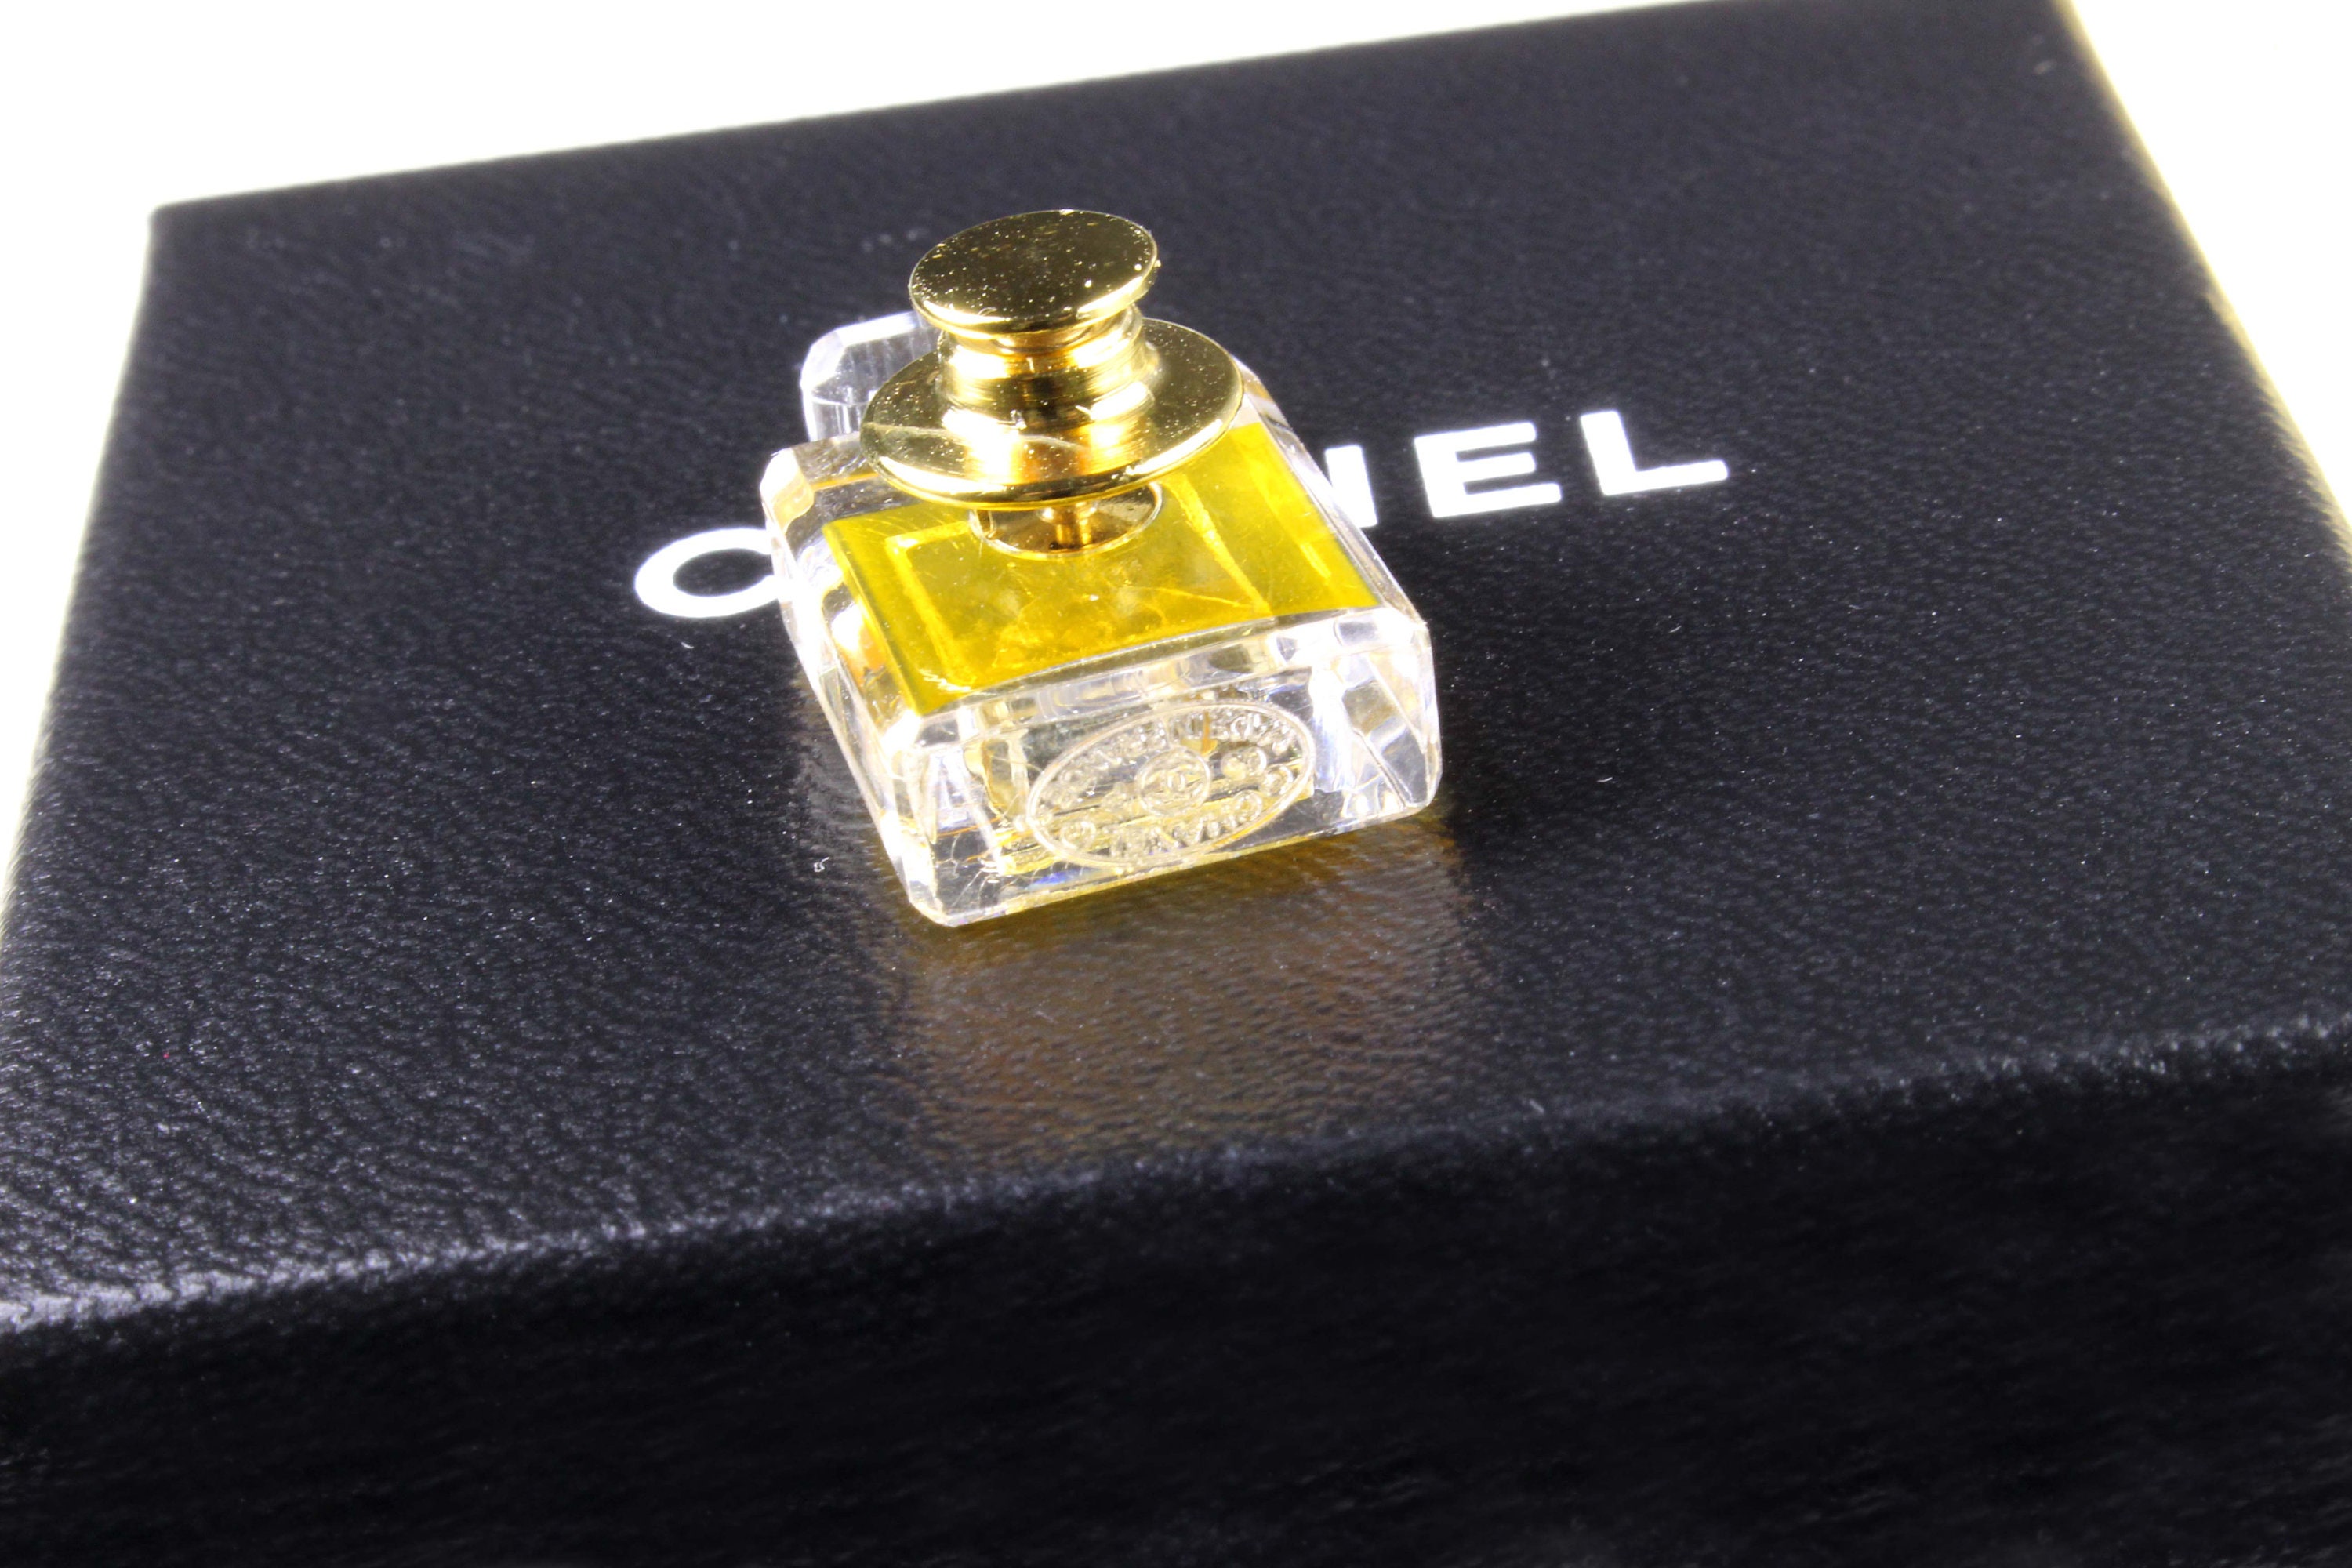 CHANEL Vintage Iconic No.5 Miniature Perfume Bottle Pin Brooch -   Denmark